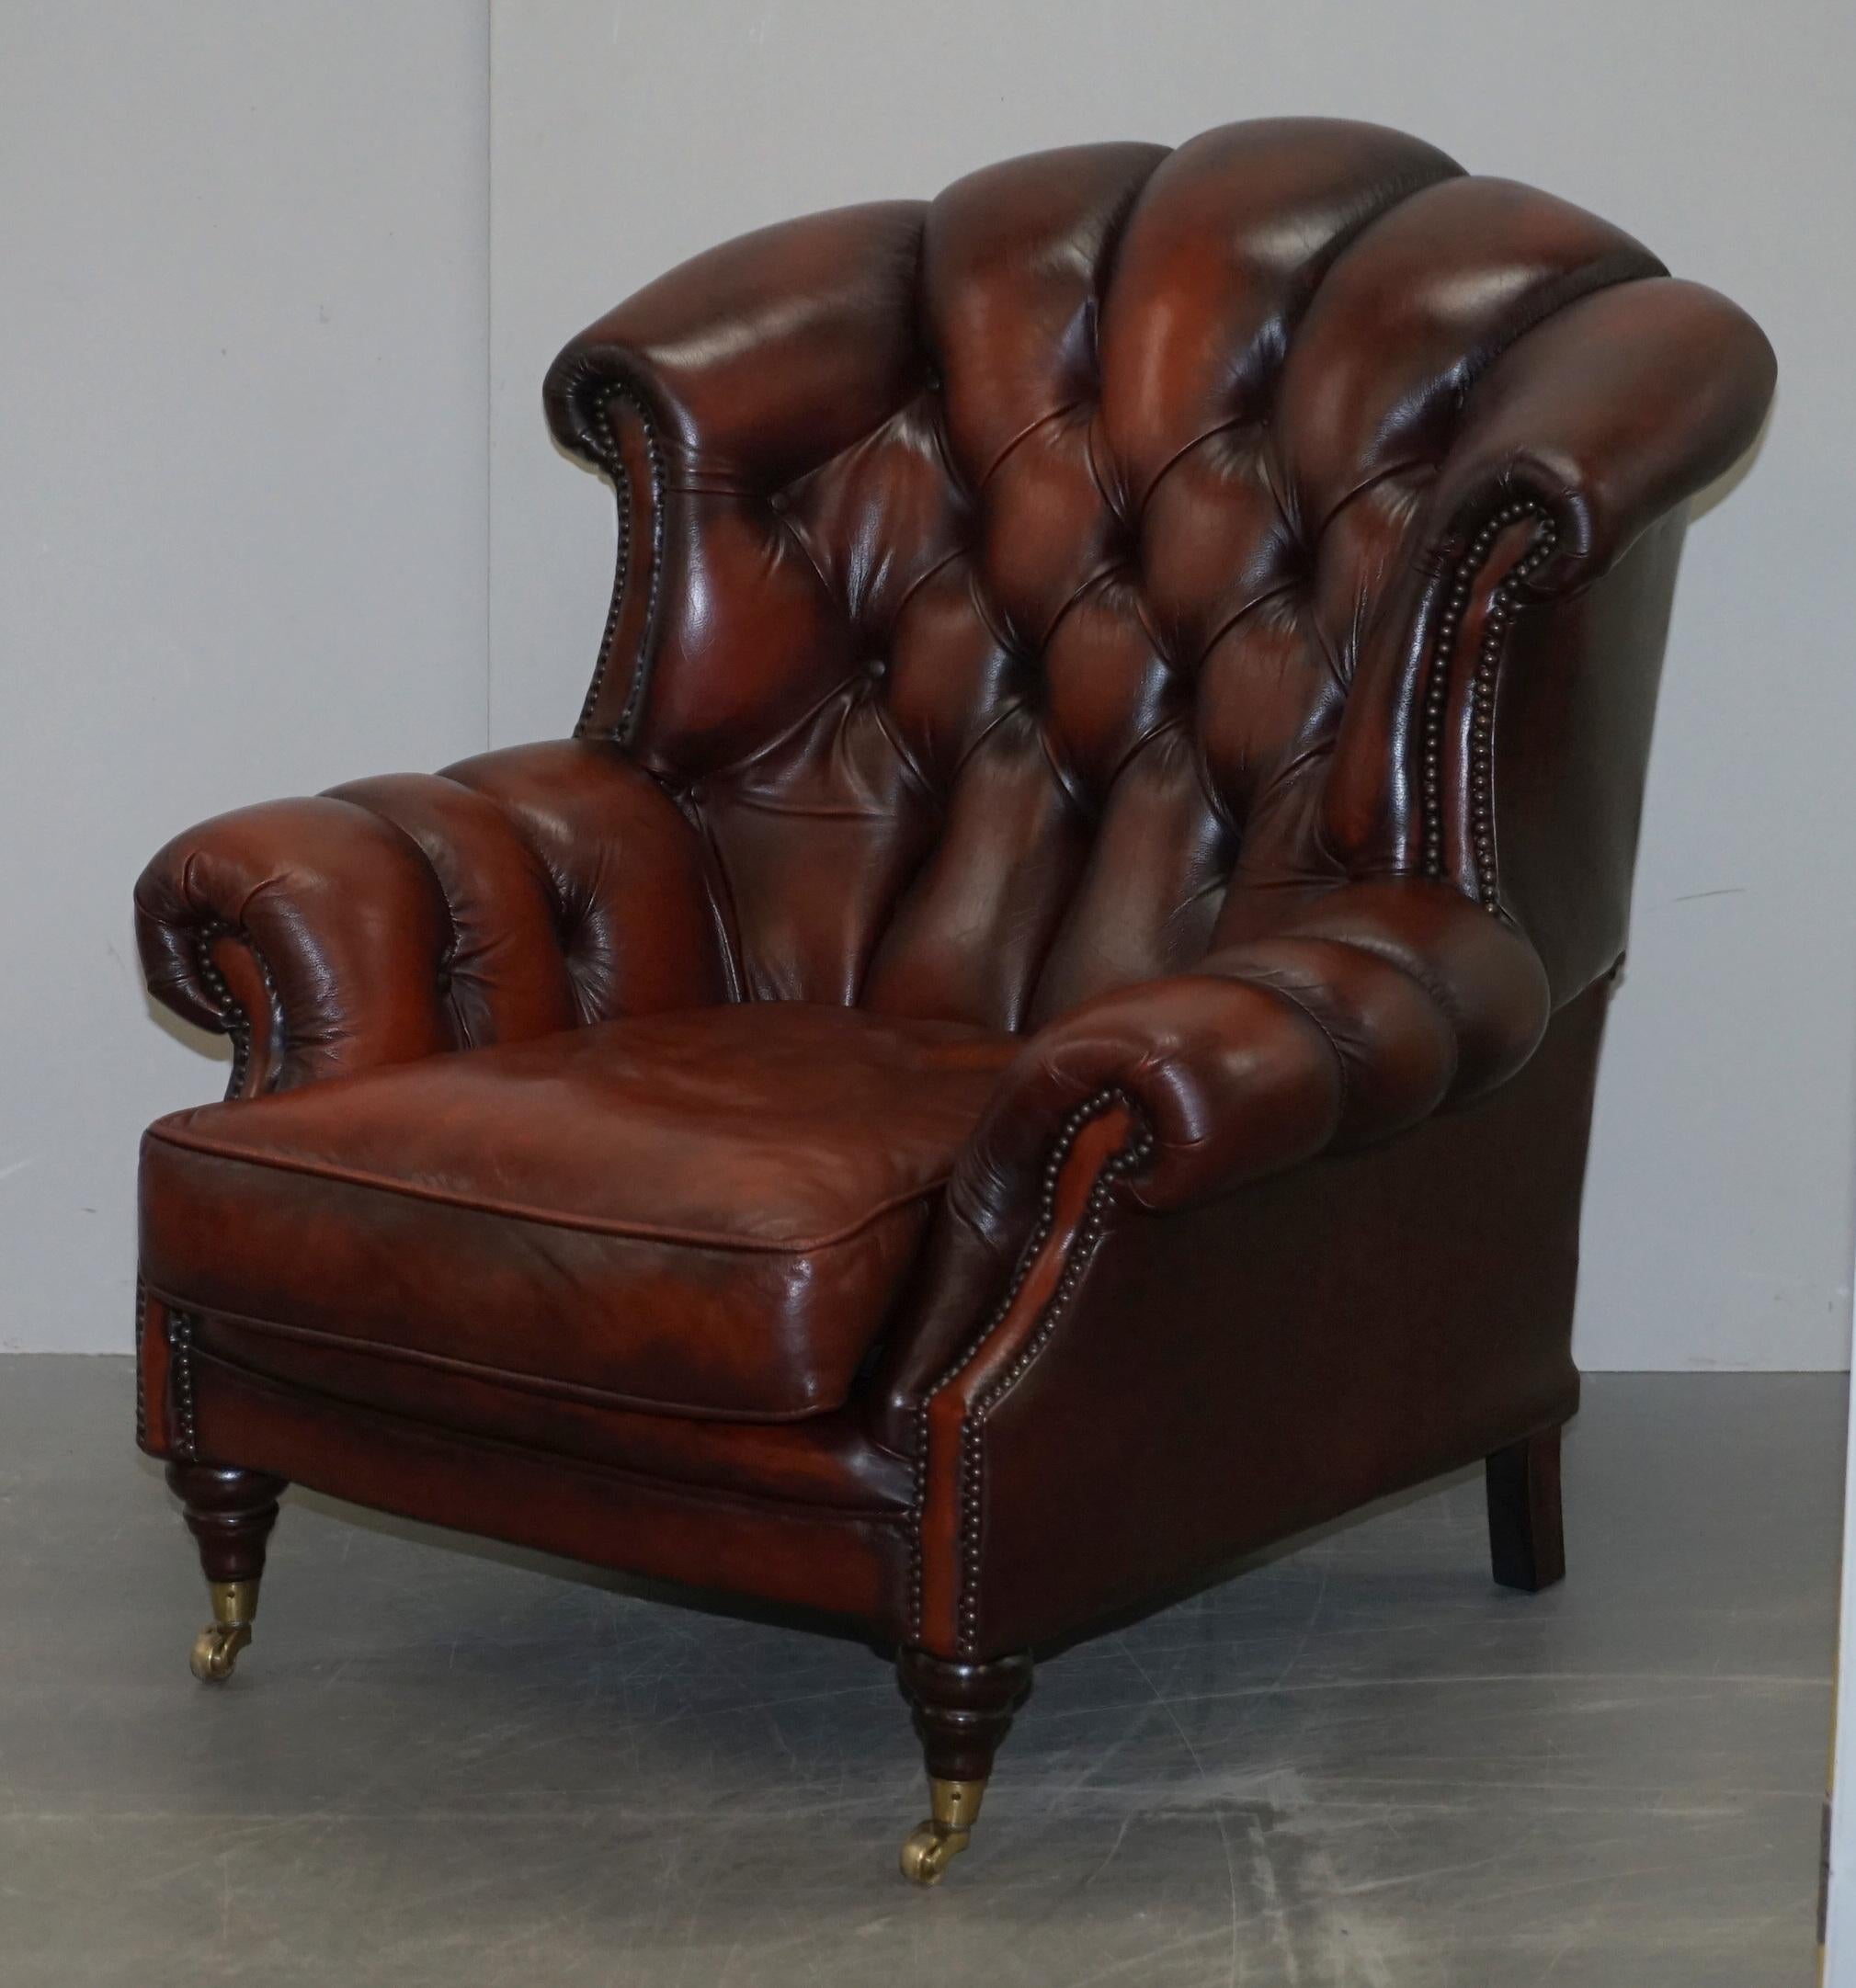 We are delighted to offer for sale this lovely pair of hand made in England by Winchester furniture, oxblood leather club armchairs 

A very good looking well made and very decorative pair of armchairs, they have nice thick oxblood leather